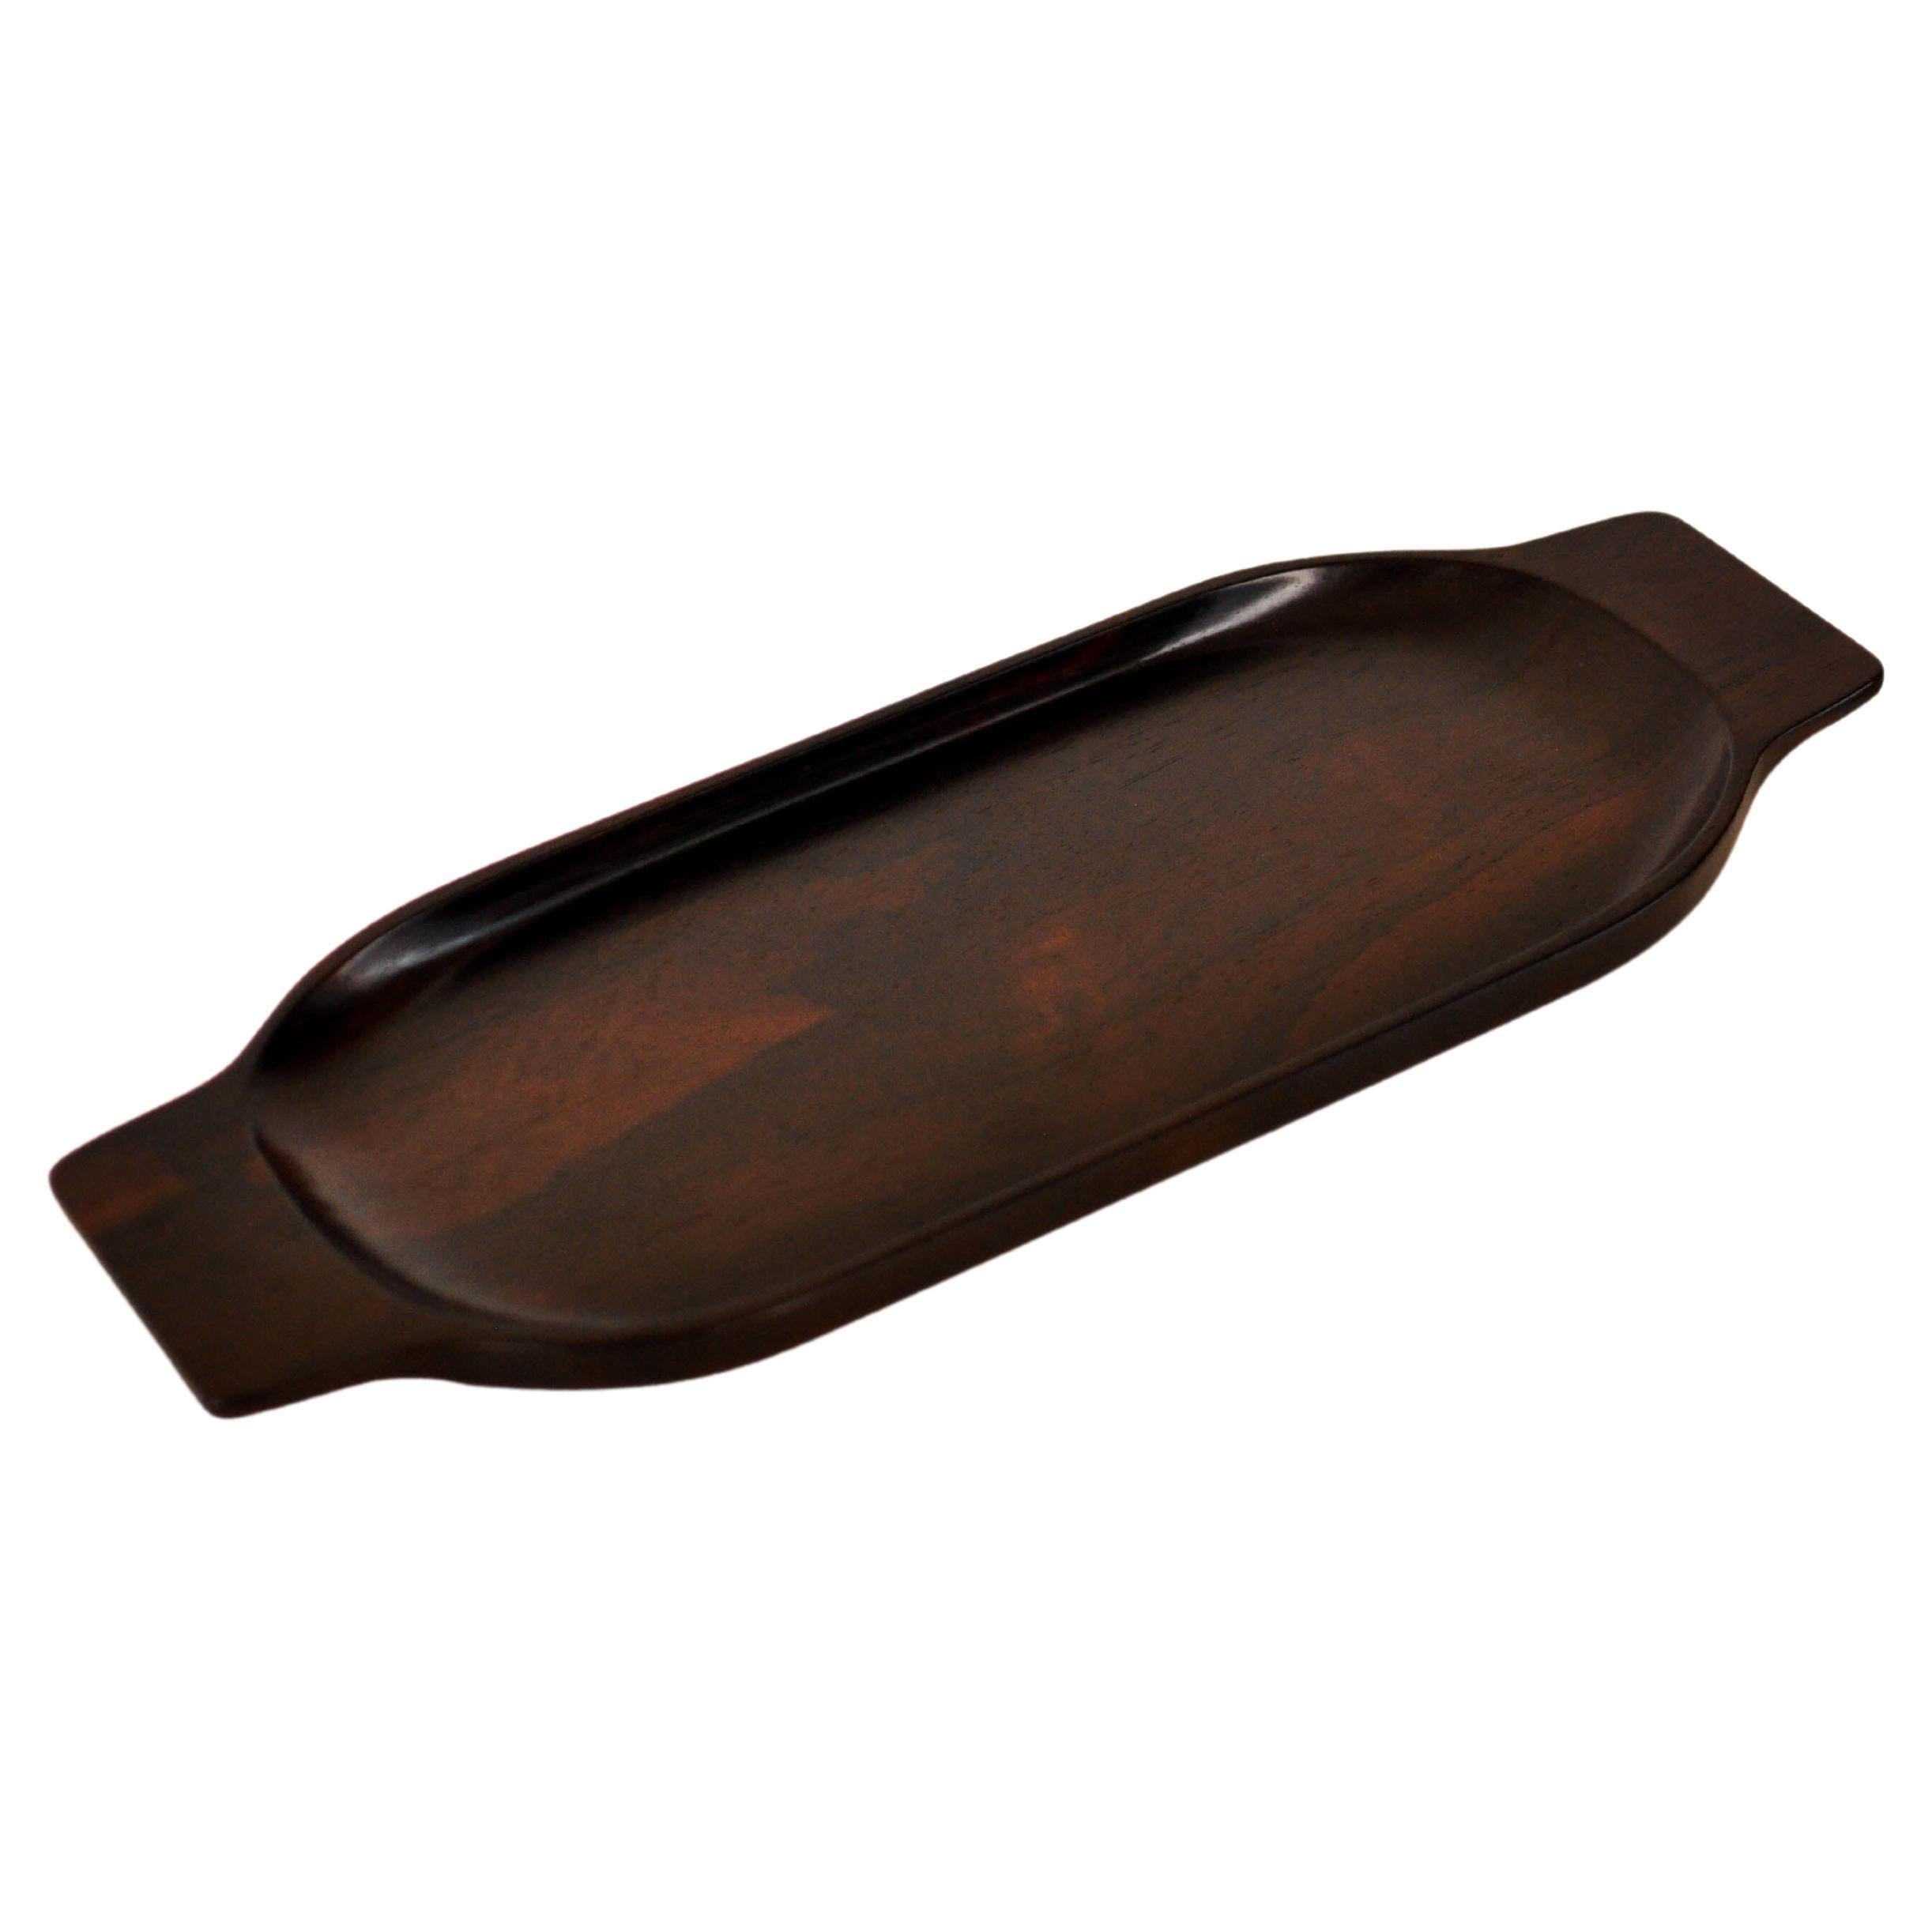 Brazilian Midcentury Serving Tray in Rosewood by Casa Finland, c. 1970 For Sale